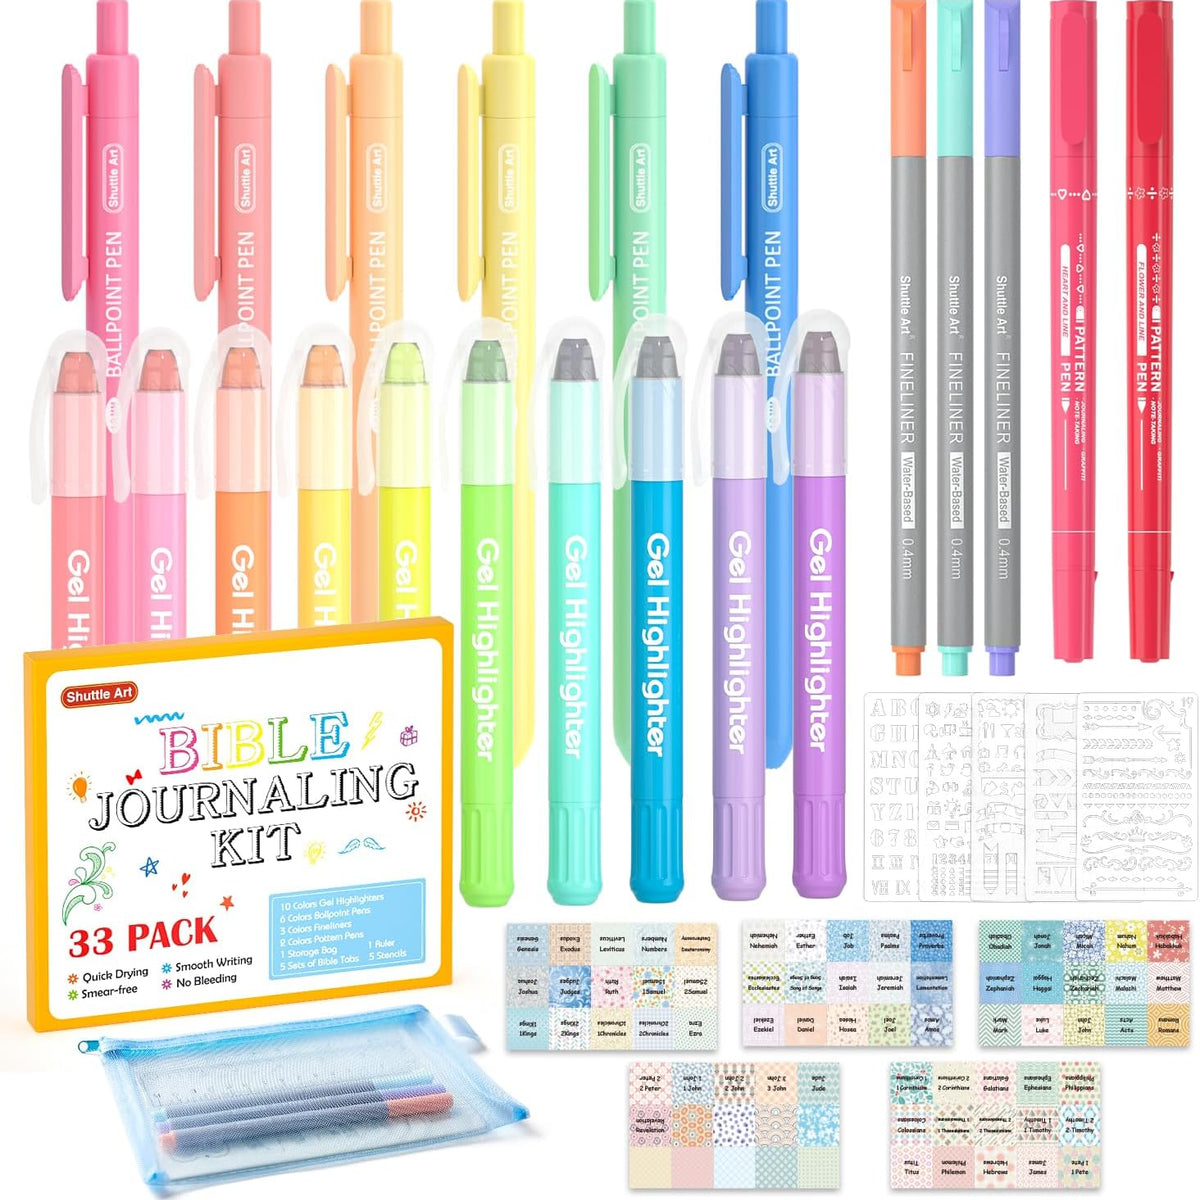 feela 24 Pack Gel Highlighters 12 Assorted Colors Bible Highlighter Markers Journaling Supplies No Bleed Through for Highlighting Journal School